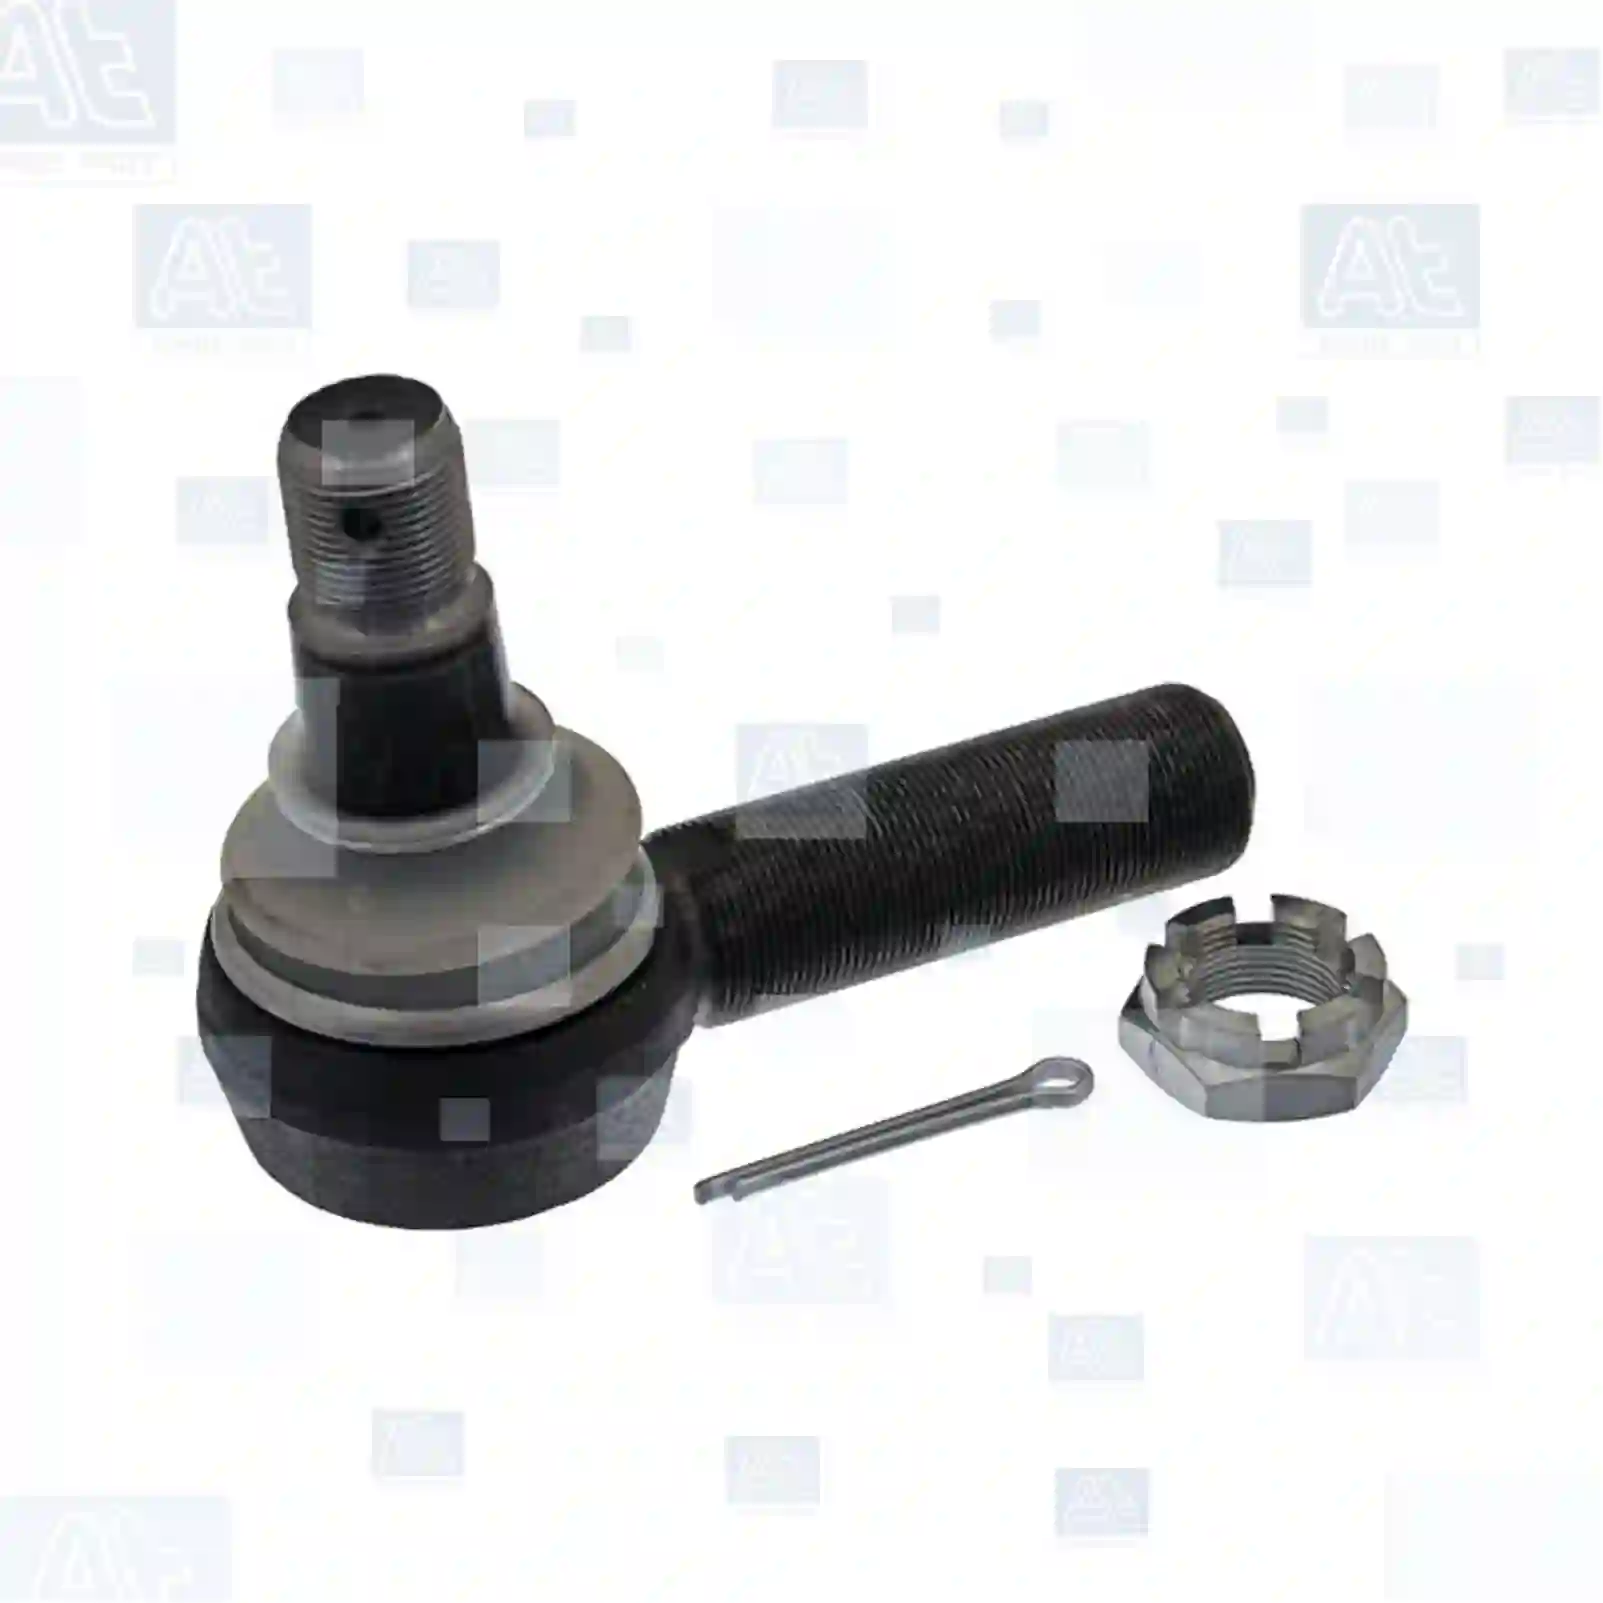 Ball joint, left hand thread, at no 77705105, oem no: 9P914835, 264072, 510052, 3141529R3, 0607053, 0690225, 0696225, 1142021, 1228115, 1329134, 1611088, 607053, 690225, 696205, 696225, 655551, 02966688, 02980323, 02984061, 03096213, 04802444, 04833820, 04833827, 04833830, 07138966, 08122754, 08190225, 42483520, 42485718, 42489395, 42491957, 42493781, 997084080374, 02984061, 04802444, 04833829, 04833830, 42489395, 42489574, 42491957, Y04505101, 56812-7M100, 02984061, 04802444, 04833823, 04833830, 07138966, 08190225, 2984061, 42489395, 42489574, 42491957, 4802444, 4833830, 5001836297, 801211834, 8190225, 571866508, 725009908, 81953010015, 81953010083, 81953010087, 81953010095, 81953010102, 81953016029, 81953016044, 81953016050, 81953016054, 81953016087, 81953016091, 81953016099, 81953016107, 81953016120, 81953016125, 81953016152, 81953016155, 81953016157, 81953016167, 81953016177, 81953016179, 81953016181, 81953016223, 81953016237, 81953016253, 81953016254, 81953016275, 81953016279, 81953016285, 81953016309, 81953016311, 81953016348, 81953016351, 81953016378, 84953016004, 90804102273, 90804102730, N1011020299, 0003300135, 0004600648, 0004601248, 0004603448, 0004603548, 0014600348, 0014601448, 0014602348, 0014603648, 0014603748, 0014607848, 0014608748, 0016077848, 0024600348, 3503307335, 3503307535, 6851476000, 6984603748, 8226236058, 011015685, 011019661, 120325101, 120325200, 122353201, 579343, 0003401170, 5000242478, 5000242486, 5000288361, 5000288378, 5000587534, 5000823265, 5000858774, 5001832581, 5001836297, 5001858759, 5001858774, 5010832583, 5430027884, 7420894053, 8001858759, 1358792, 1420821, 1738380, 1914426, 2021425, 2051165, 283783, 395009, 6851481000, 6851485000, 8226236058, 0801211834, 218633100115, 634301300, 20264072, 15176472, 1696057, 1697297, 20742129, 20745042, 20821150, 20894053, ZG40346-0008 At Spare Part | Engine, Accelerator Pedal, Camshaft, Connecting Rod, Crankcase, Crankshaft, Cylinder Head, Engine Suspension Mountings, Exhaust Manifold, Exhaust Gas Recirculation, Filter Kits, Flywheel Housing, General Overhaul Kits, Engine, Intake Manifold, Oil Cleaner, Oil Cooler, Oil Filter, Oil Pump, Oil Sump, Piston & Liner, Sensor & Switch, Timing Case, Turbocharger, Cooling System, Belt Tensioner, Coolant Filter, Coolant Pipe, Corrosion Prevention Agent, Drive, Expansion Tank, Fan, Intercooler, Monitors & Gauges, Radiator, Thermostat, V-Belt / Timing belt, Water Pump, Fuel System, Electronical Injector Unit, Feed Pump, Fuel Filter, cpl., Fuel Gauge Sender,  Fuel Line, Fuel Pump, Fuel Tank, Injection Line Kit, Injection Pump, Exhaust System, Clutch & Pedal, Gearbox, Propeller Shaft, Axles, Brake System, Hubs & Wheels, Suspension, Leaf Spring, Universal Parts / Accessories, Steering, Electrical System, Cabin Ball joint, left hand thread, at no 77705105, oem no: 9P914835, 264072, 510052, 3141529R3, 0607053, 0690225, 0696225, 1142021, 1228115, 1329134, 1611088, 607053, 690225, 696205, 696225, 655551, 02966688, 02980323, 02984061, 03096213, 04802444, 04833820, 04833827, 04833830, 07138966, 08122754, 08190225, 42483520, 42485718, 42489395, 42491957, 42493781, 997084080374, 02984061, 04802444, 04833829, 04833830, 42489395, 42489574, 42491957, Y04505101, 56812-7M100, 02984061, 04802444, 04833823, 04833830, 07138966, 08190225, 2984061, 42489395, 42489574, 42491957, 4802444, 4833830, 5001836297, 801211834, 8190225, 571866508, 725009908, 81953010015, 81953010083, 81953010087, 81953010095, 81953010102, 81953016029, 81953016044, 81953016050, 81953016054, 81953016087, 81953016091, 81953016099, 81953016107, 81953016120, 81953016125, 81953016152, 81953016155, 81953016157, 81953016167, 81953016177, 81953016179, 81953016181, 81953016223, 81953016237, 81953016253, 81953016254, 81953016275, 81953016279, 81953016285, 81953016309, 81953016311, 81953016348, 81953016351, 81953016378, 84953016004, 90804102273, 90804102730, N1011020299, 0003300135, 0004600648, 0004601248, 0004603448, 0004603548, 0014600348, 0014601448, 0014602348, 0014603648, 0014603748, 0014607848, 0014608748, 0016077848, 0024600348, 3503307335, 3503307535, 6851476000, 6984603748, 8226236058, 011015685, 011019661, 120325101, 120325200, 122353201, 579343, 0003401170, 5000242478, 5000242486, 5000288361, 5000288378, 5000587534, 5000823265, 5000858774, 5001832581, 5001836297, 5001858759, 5001858774, 5010832583, 5430027884, 7420894053, 8001858759, 1358792, 1420821, 1738380, 1914426, 2021425, 2051165, 283783, 395009, 6851481000, 6851485000, 8226236058, 0801211834, 218633100115, 634301300, 20264072, 15176472, 1696057, 1697297, 20742129, 20745042, 20821150, 20894053, ZG40346-0008 At Spare Part | Engine, Accelerator Pedal, Camshaft, Connecting Rod, Crankcase, Crankshaft, Cylinder Head, Engine Suspension Mountings, Exhaust Manifold, Exhaust Gas Recirculation, Filter Kits, Flywheel Housing, General Overhaul Kits, Engine, Intake Manifold, Oil Cleaner, Oil Cooler, Oil Filter, Oil Pump, Oil Sump, Piston & Liner, Sensor & Switch, Timing Case, Turbocharger, Cooling System, Belt Tensioner, Coolant Filter, Coolant Pipe, Corrosion Prevention Agent, Drive, Expansion Tank, Fan, Intercooler, Monitors & Gauges, Radiator, Thermostat, V-Belt / Timing belt, Water Pump, Fuel System, Electronical Injector Unit, Feed Pump, Fuel Filter, cpl., Fuel Gauge Sender,  Fuel Line, Fuel Pump, Fuel Tank, Injection Line Kit, Injection Pump, Exhaust System, Clutch & Pedal, Gearbox, Propeller Shaft, Axles, Brake System, Hubs & Wheels, Suspension, Leaf Spring, Universal Parts / Accessories, Steering, Electrical System, Cabin